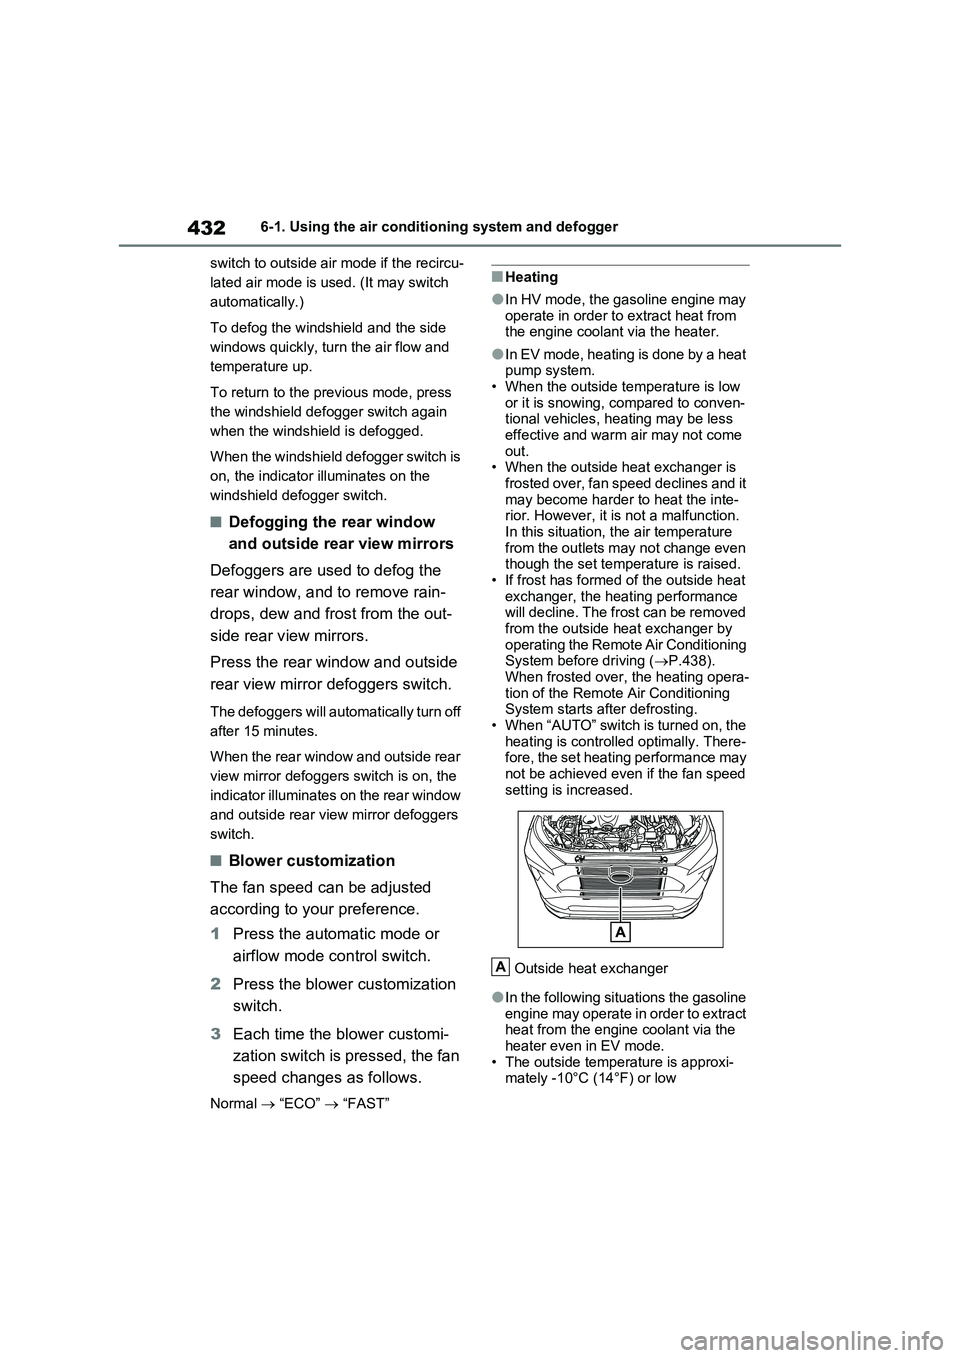 TOYOTA RAV4 PLUG-IN HYBRID 2023  Owners Manual 4326-1. Using the air conditioning system and defogger
switch to outside air mode if the recircu-
lated air mode is used. (It may switch 
automatically.)
To defog the windshield and the side 
windows 